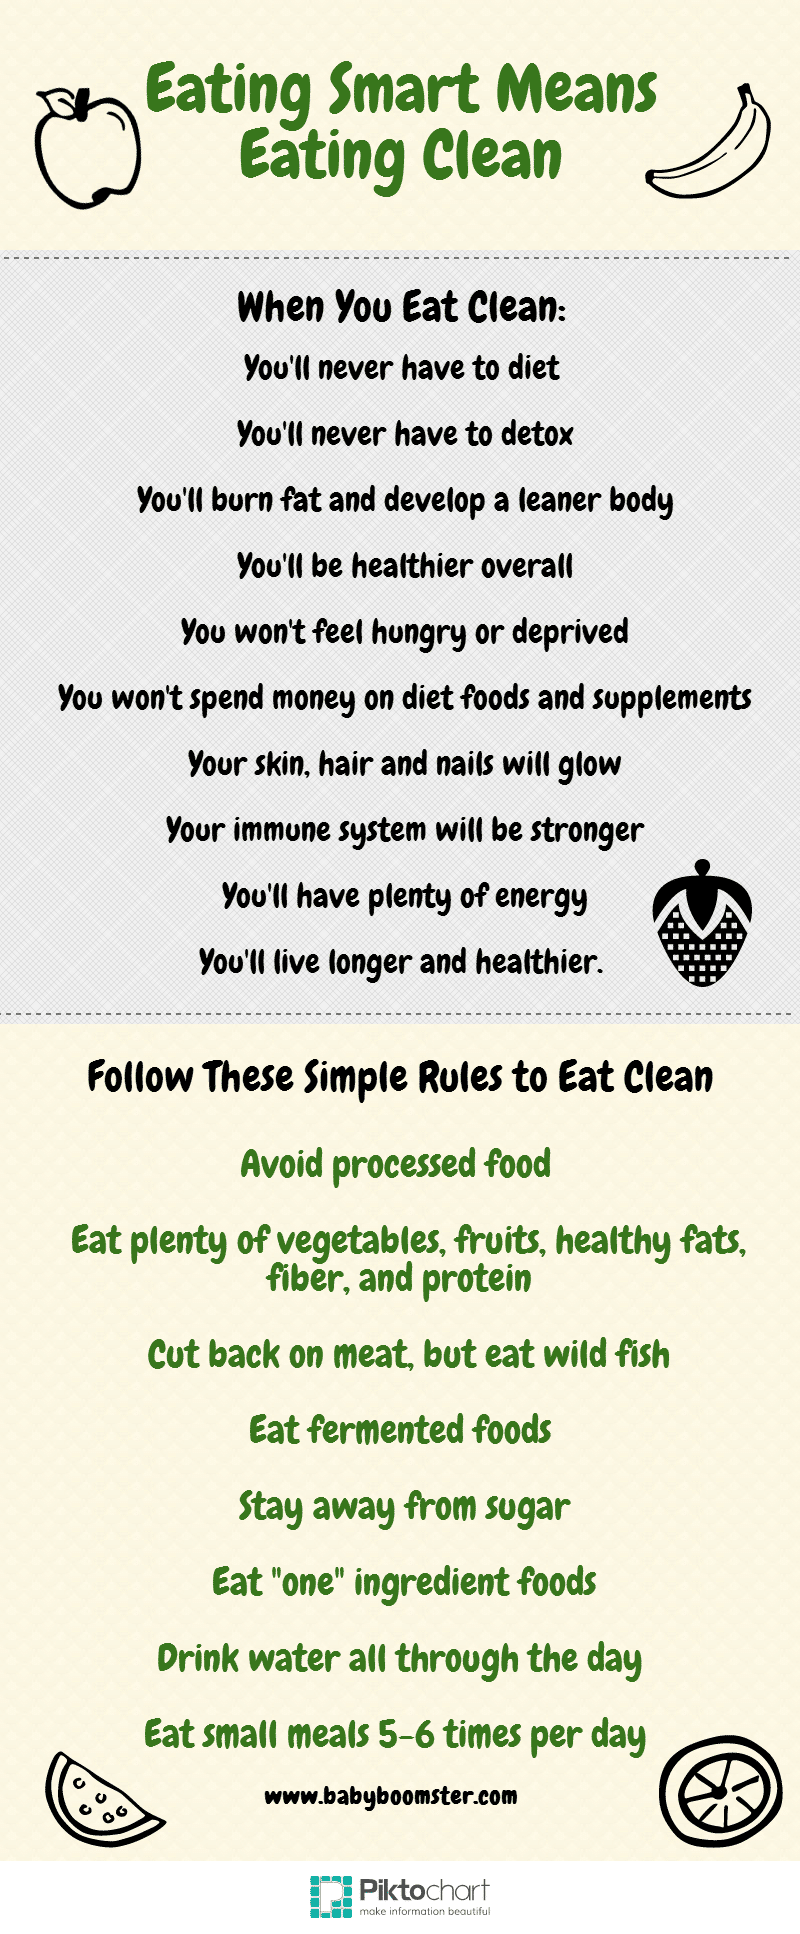 Eating Smart Means Eating Clean